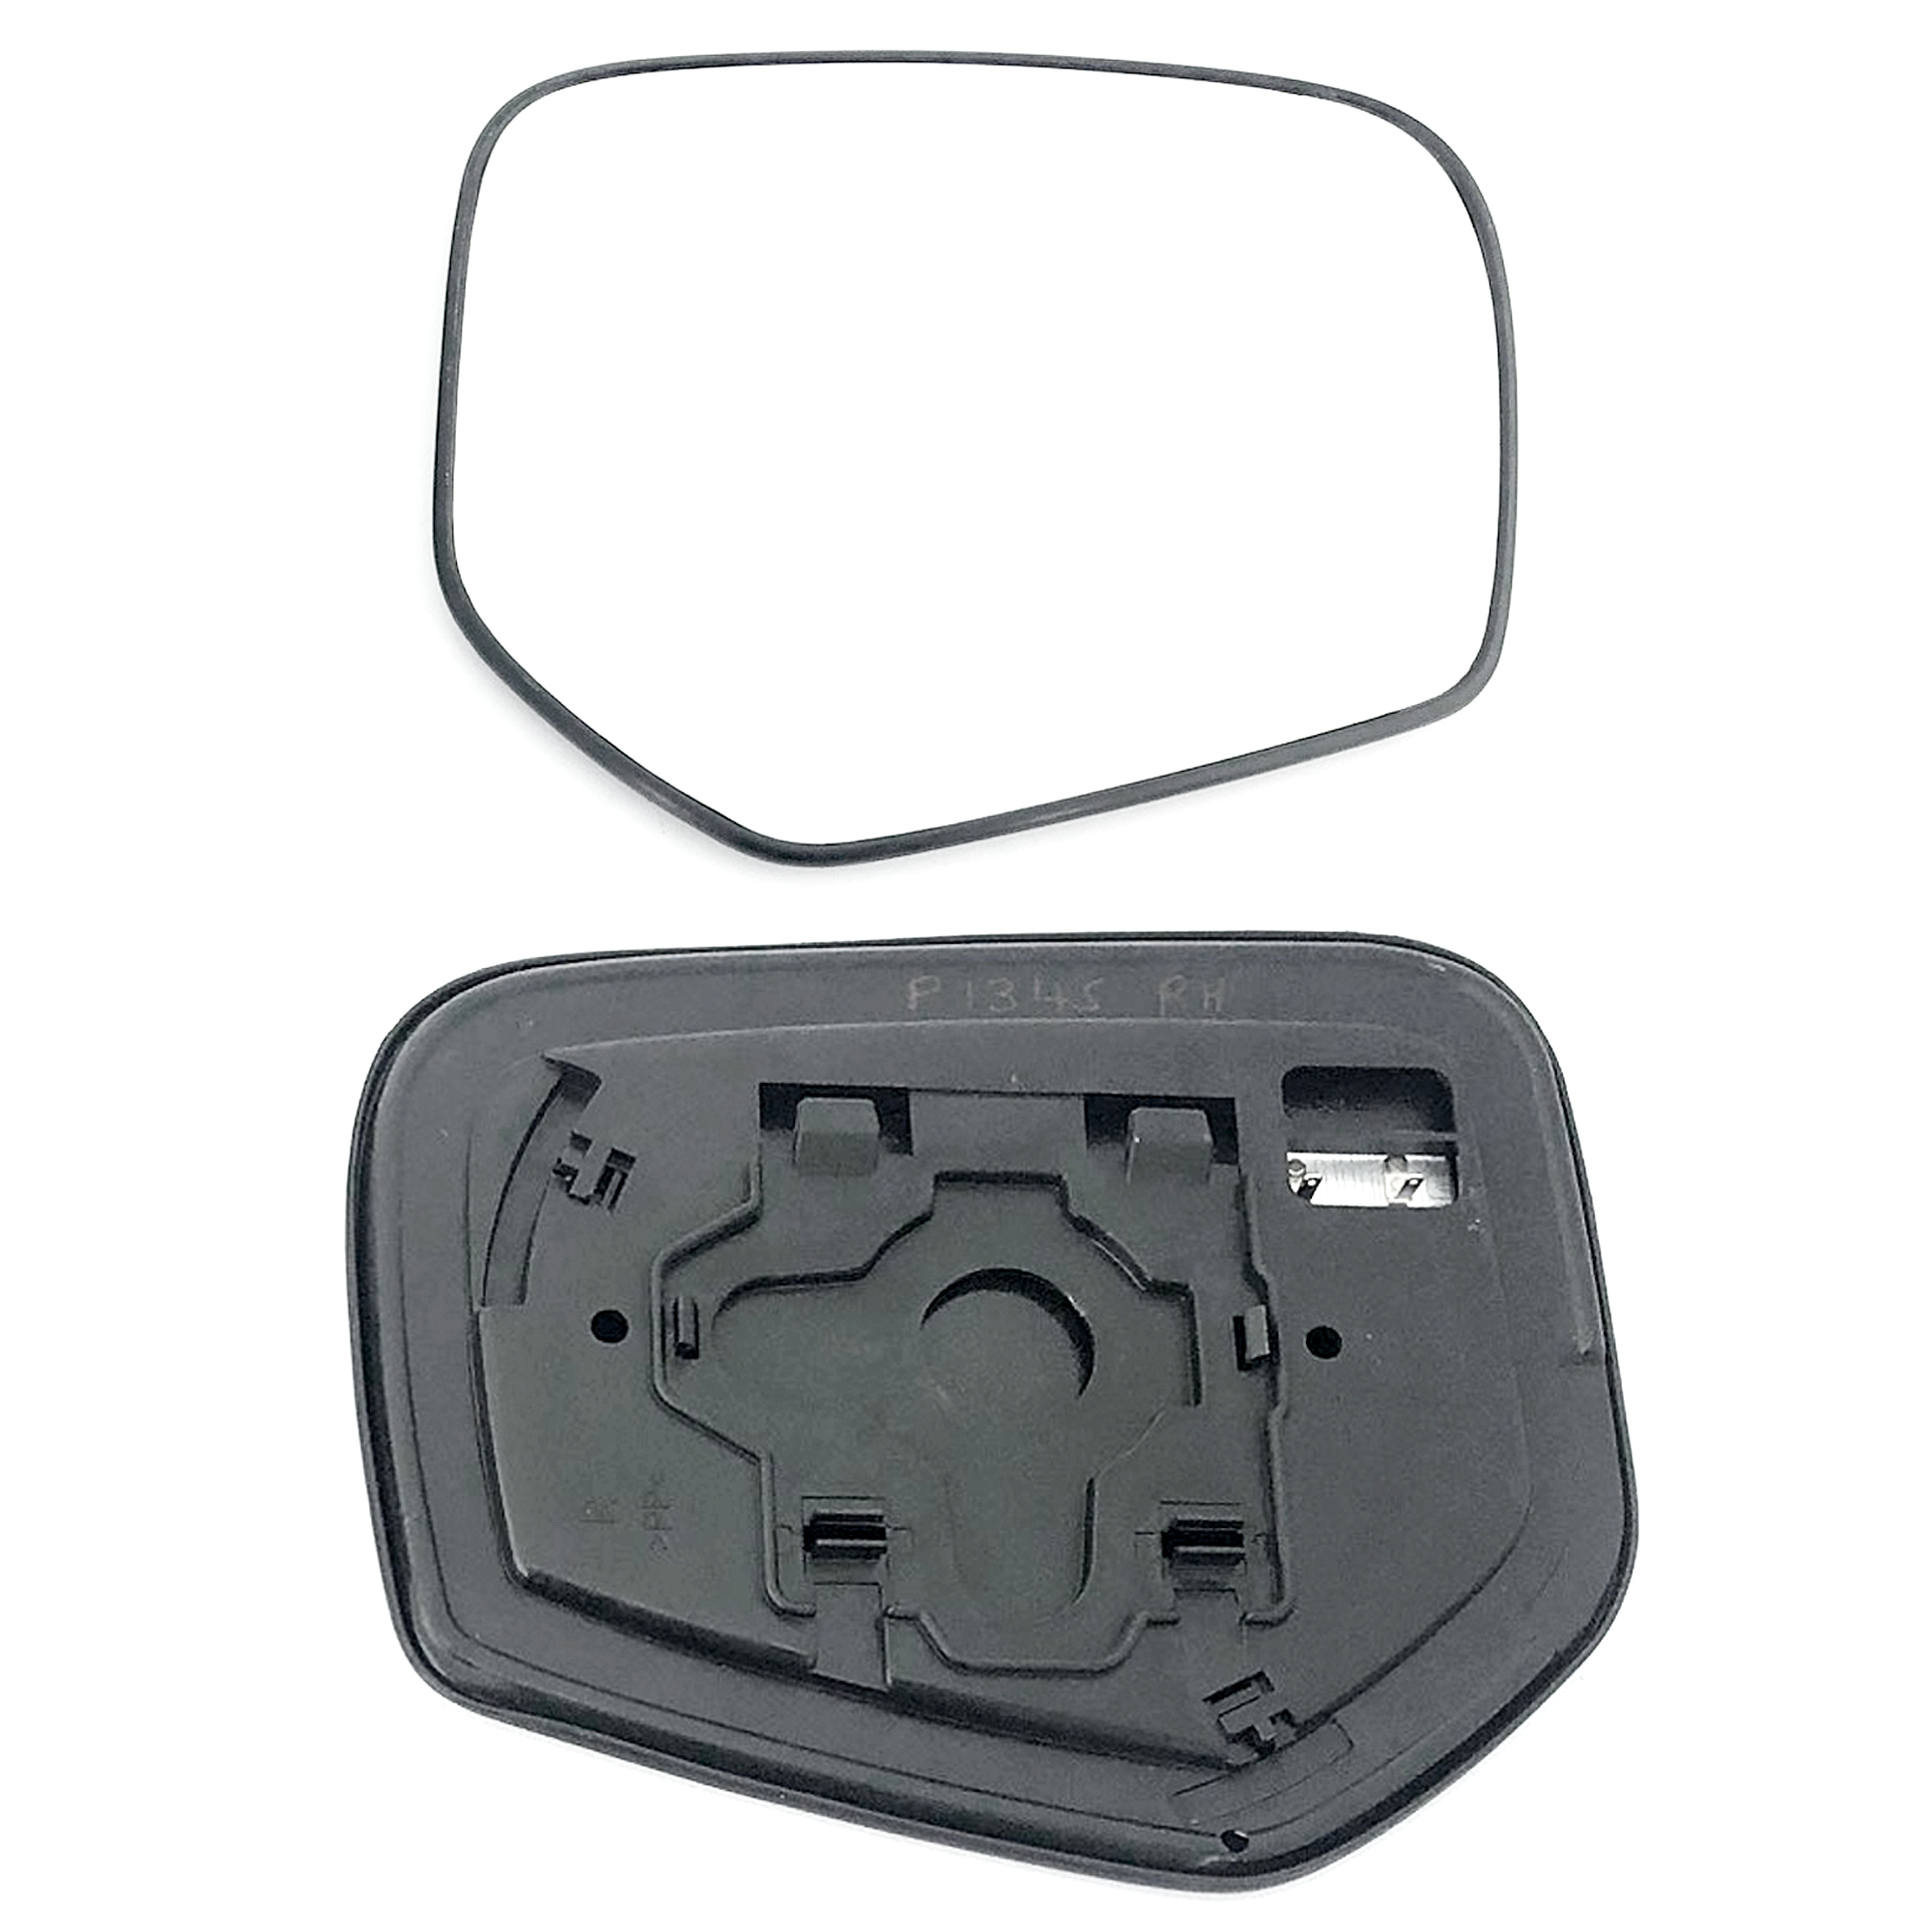 Mitsubishi L200 Wing Mirror Glass With Base LEFT HAND ( UK Passenger Side ) 2015 to 2019 – Heated Base Convex Mirror